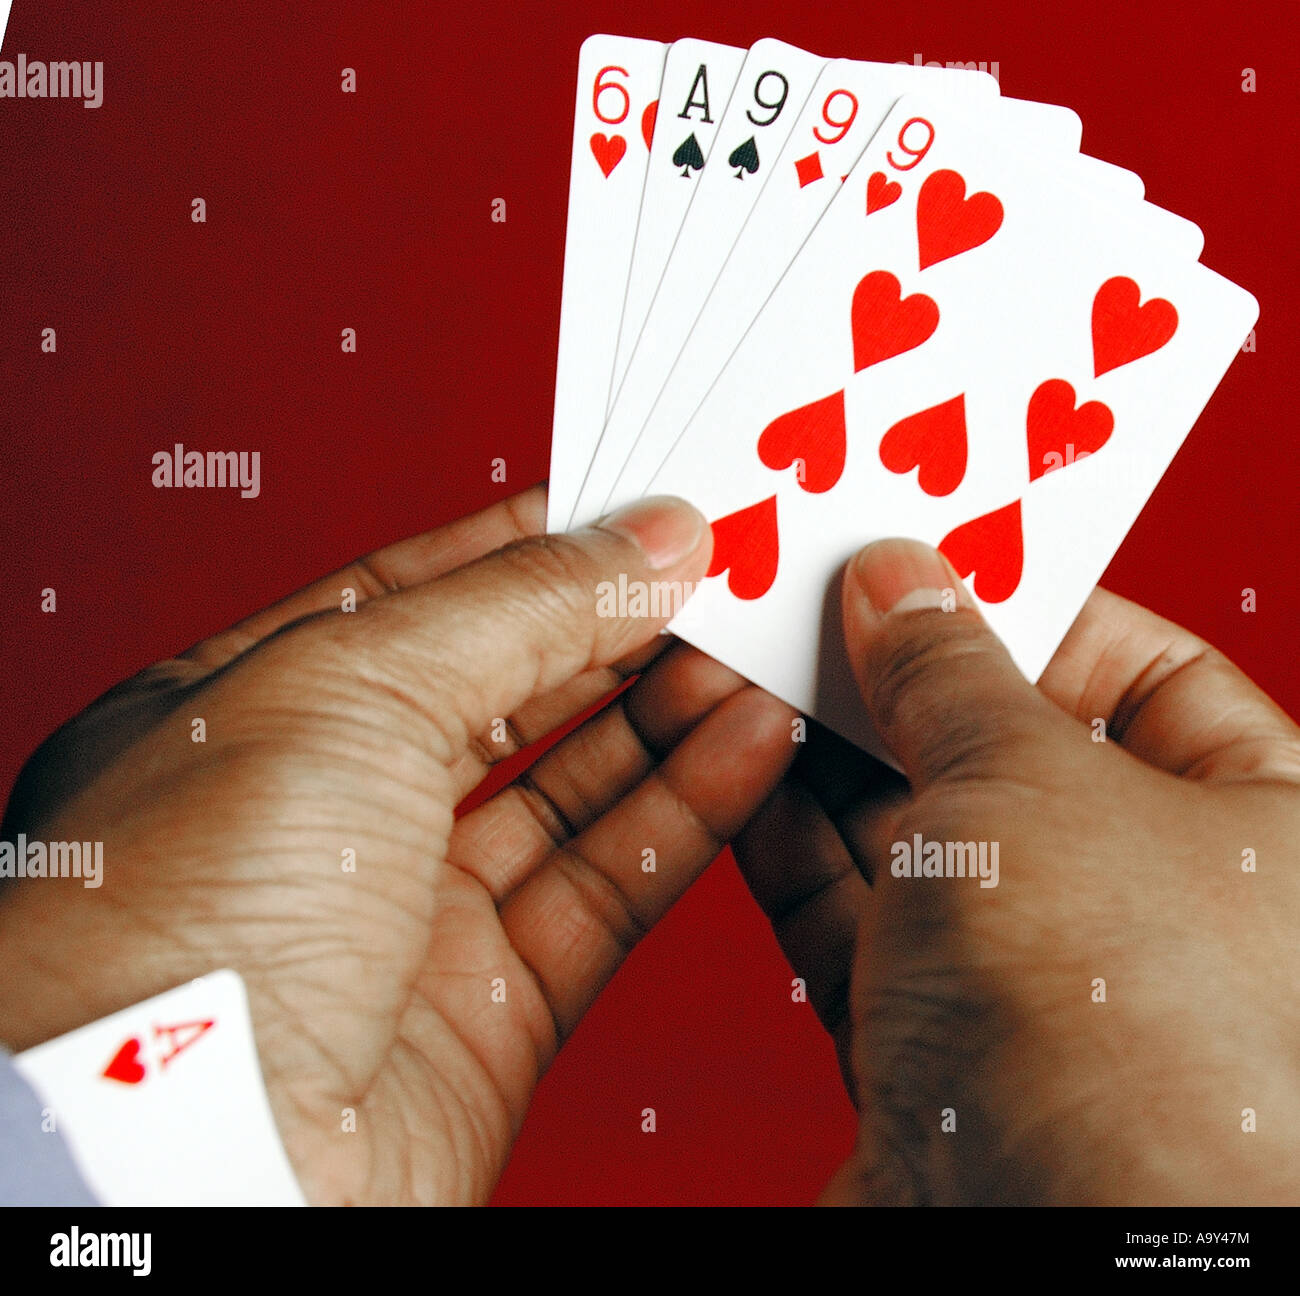 Poker hand with a possible full house with ace hidden up sleeve Stock Photo